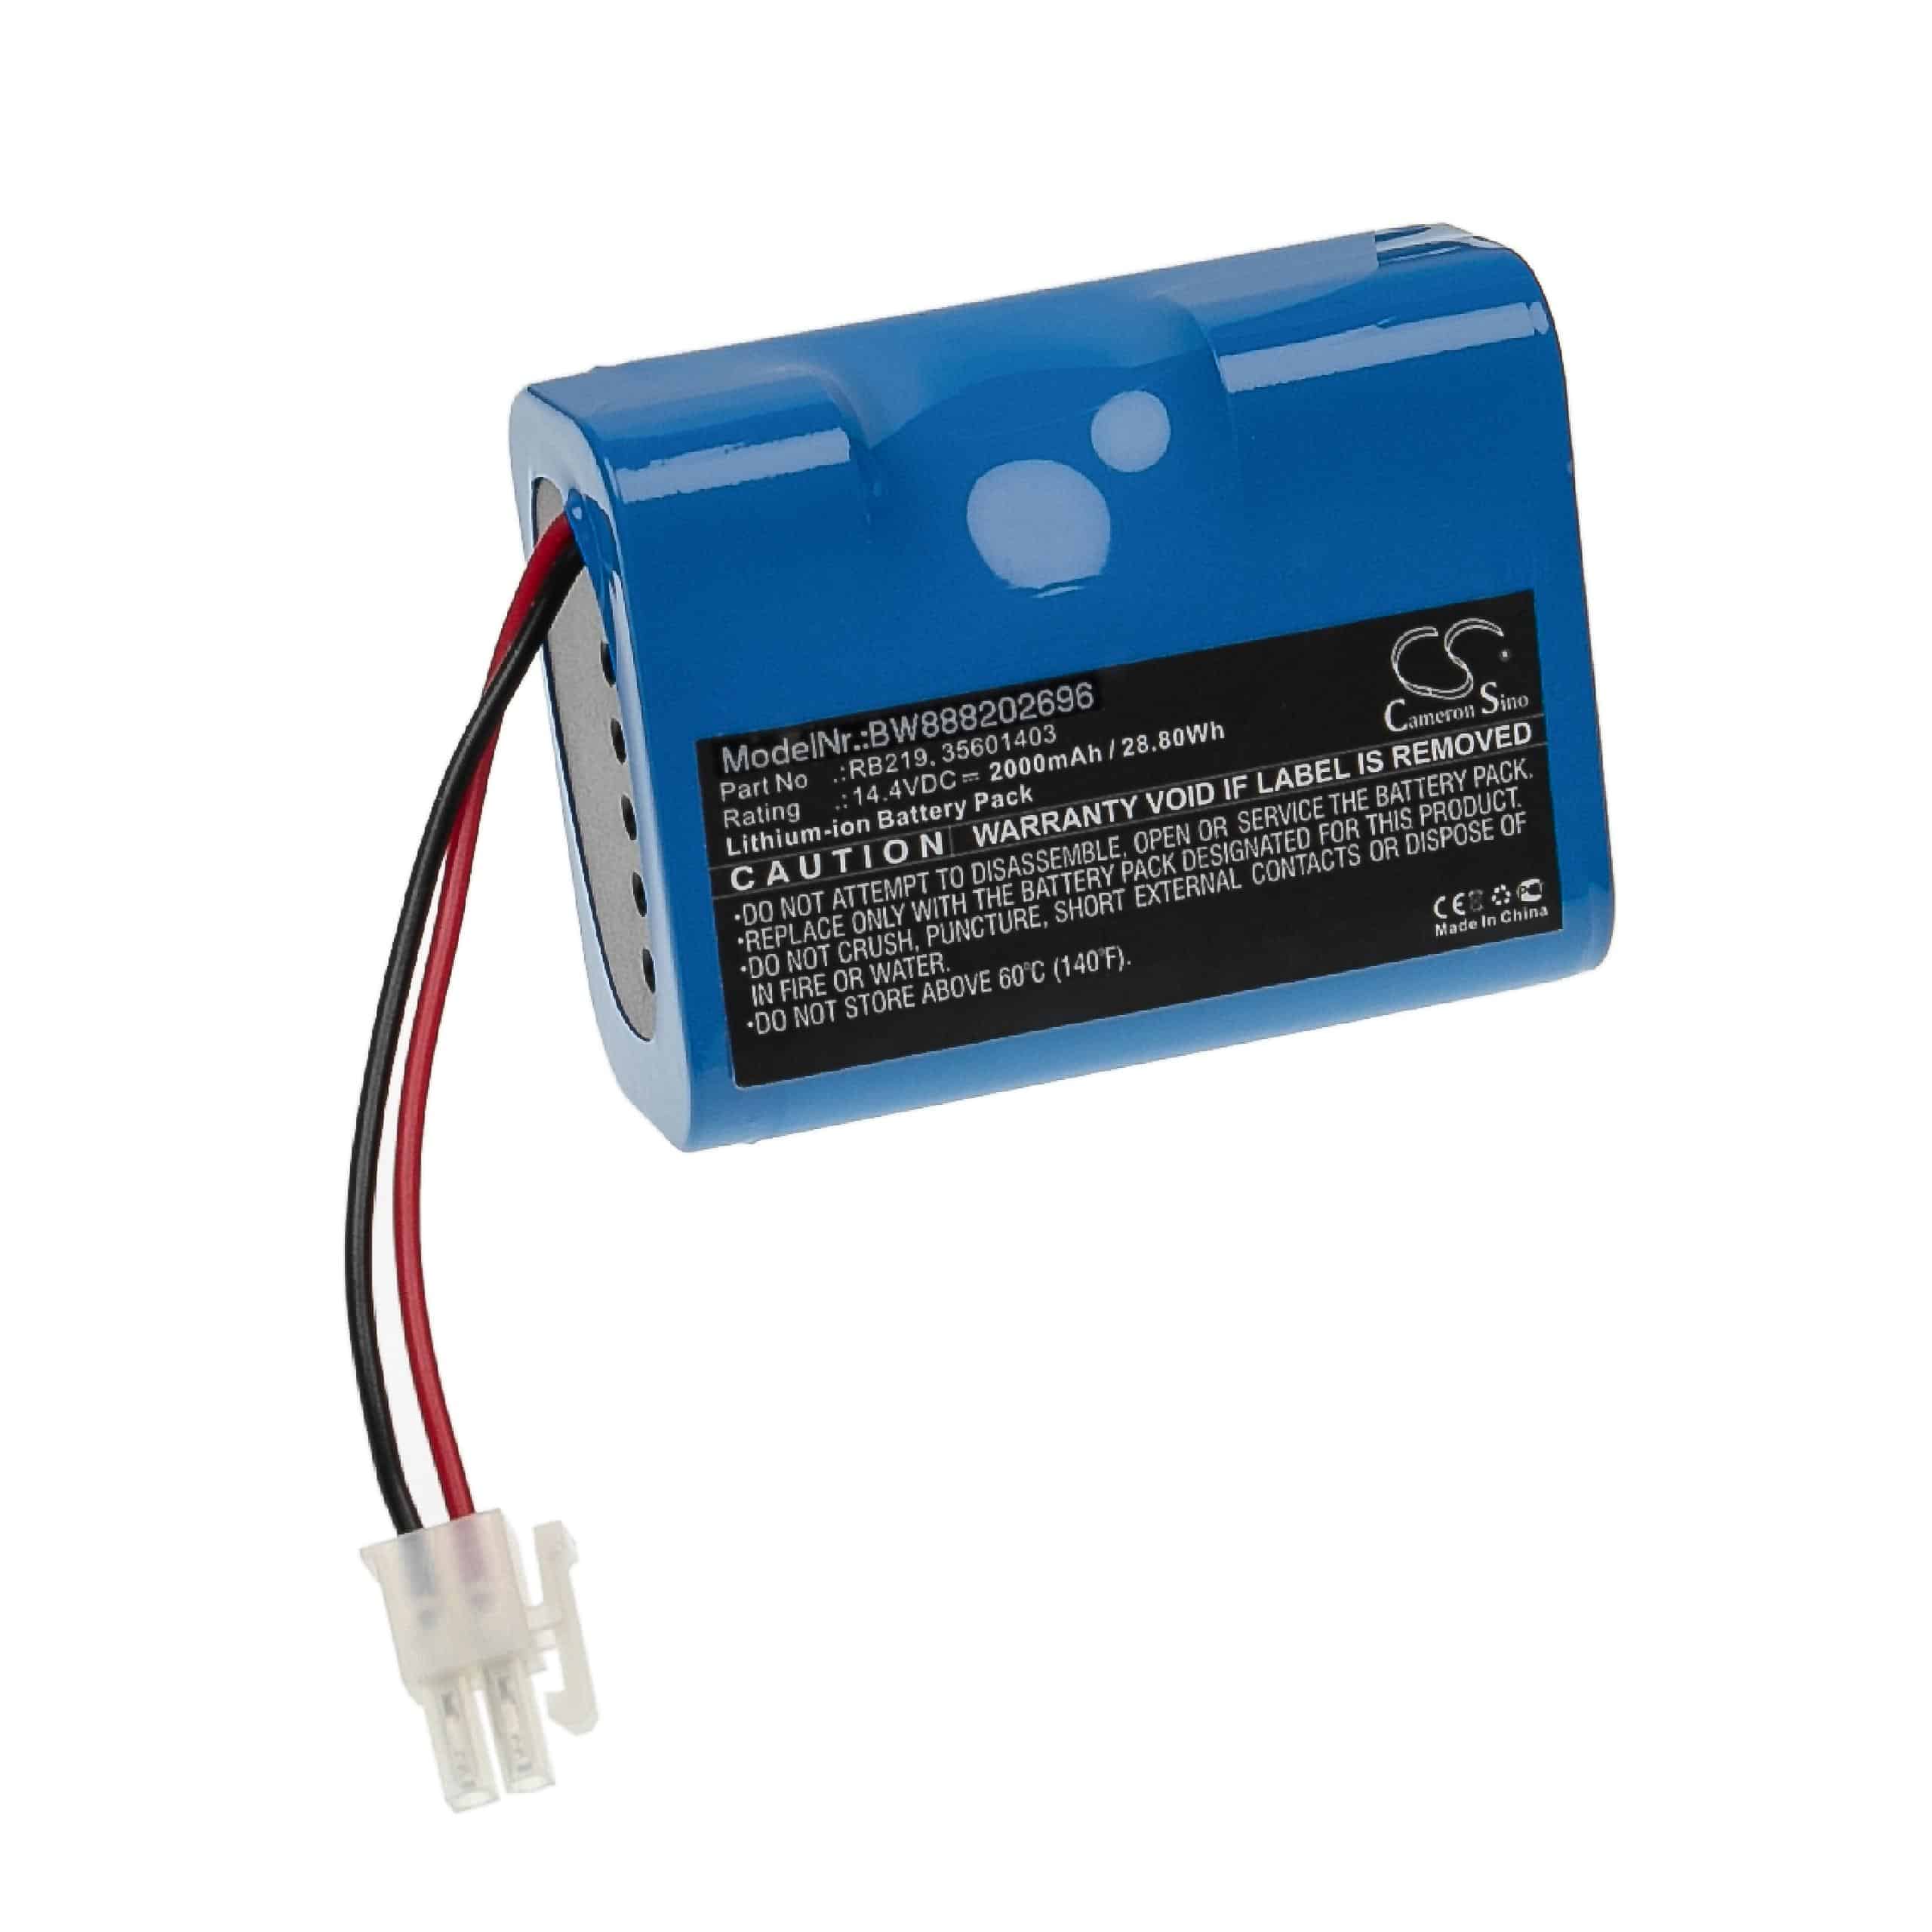 Battery Replacement for Hoover RB219, Li-RB226 for - 2000mAh, 14.4V, Li-Ion